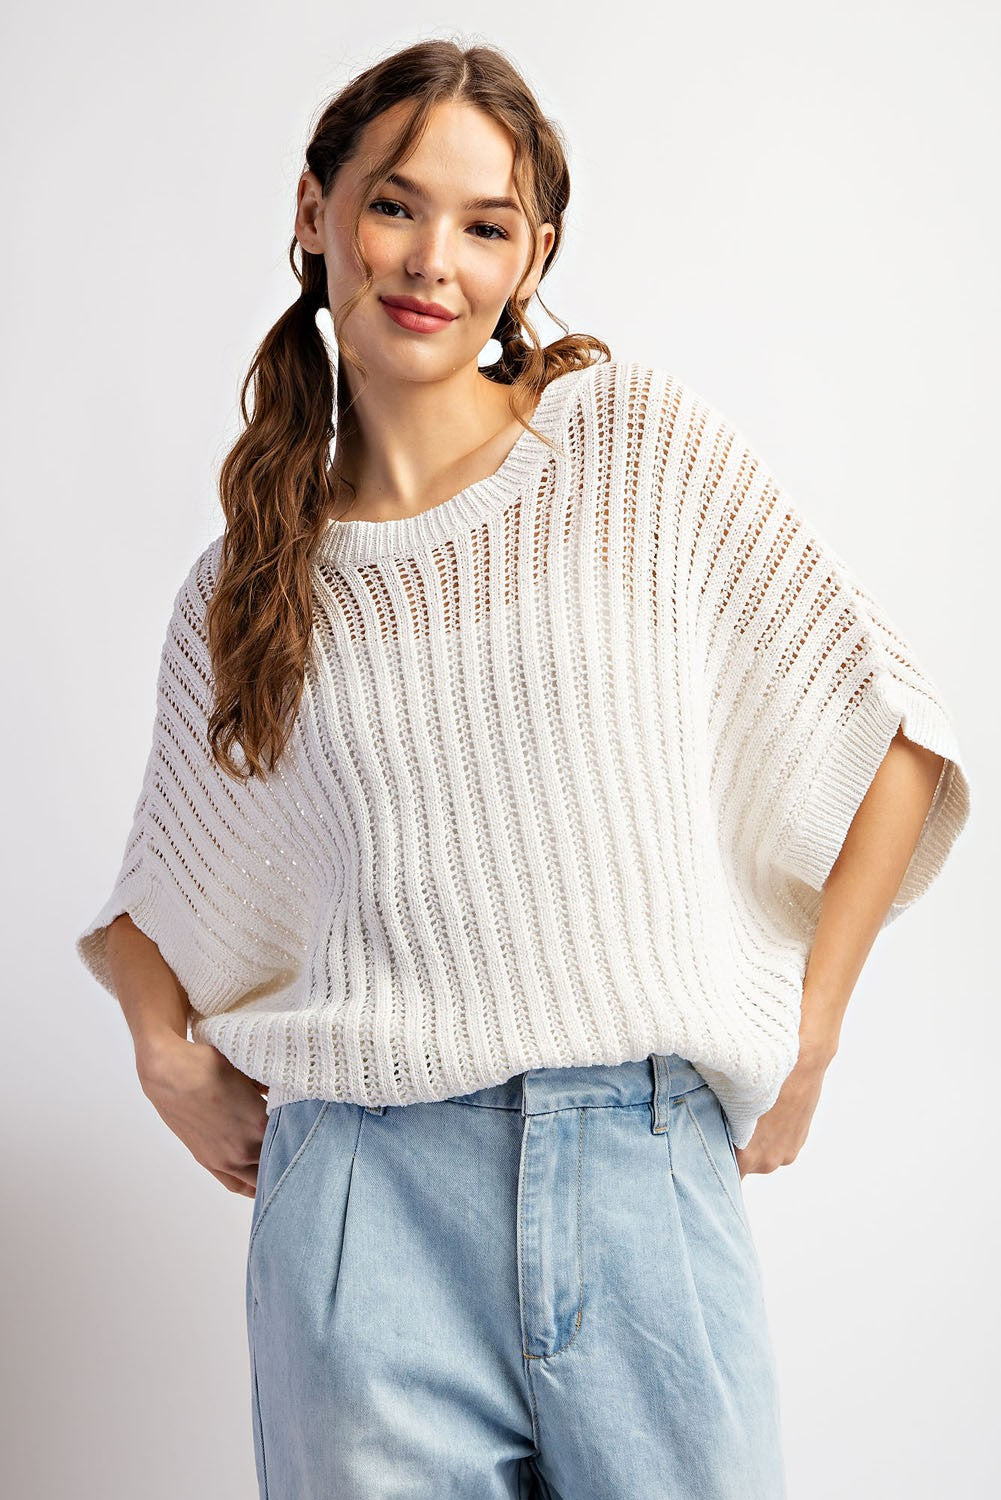 Jacie Dolman Sleeve Top - KC Outfitter